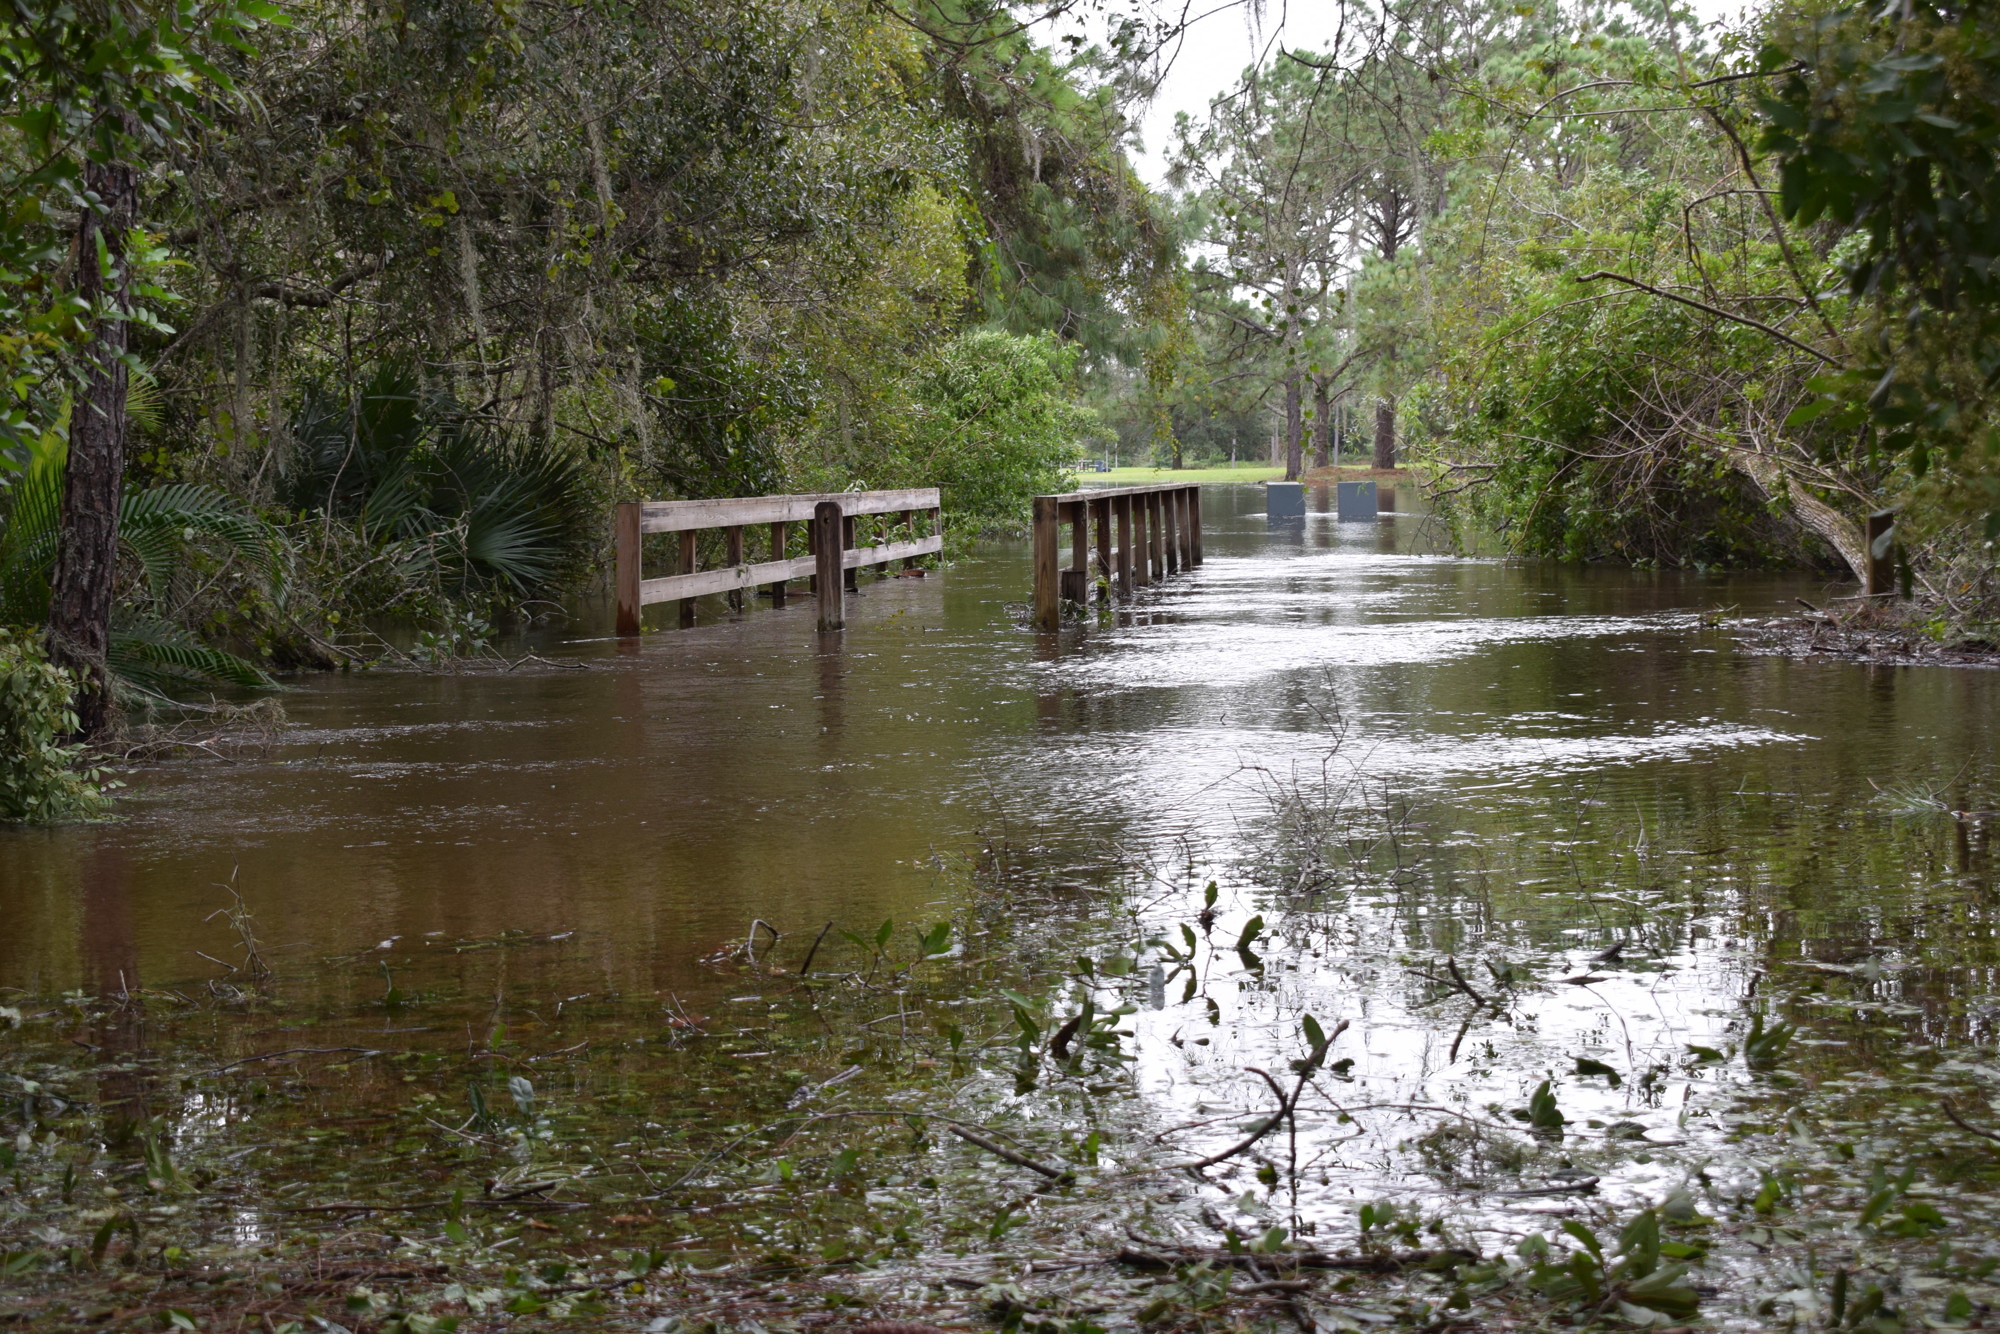 The trail at Summerfield's Heron's Nest Park was flooded on Thursday morning after Hurricane Ian. (Photo by Jay Heater)